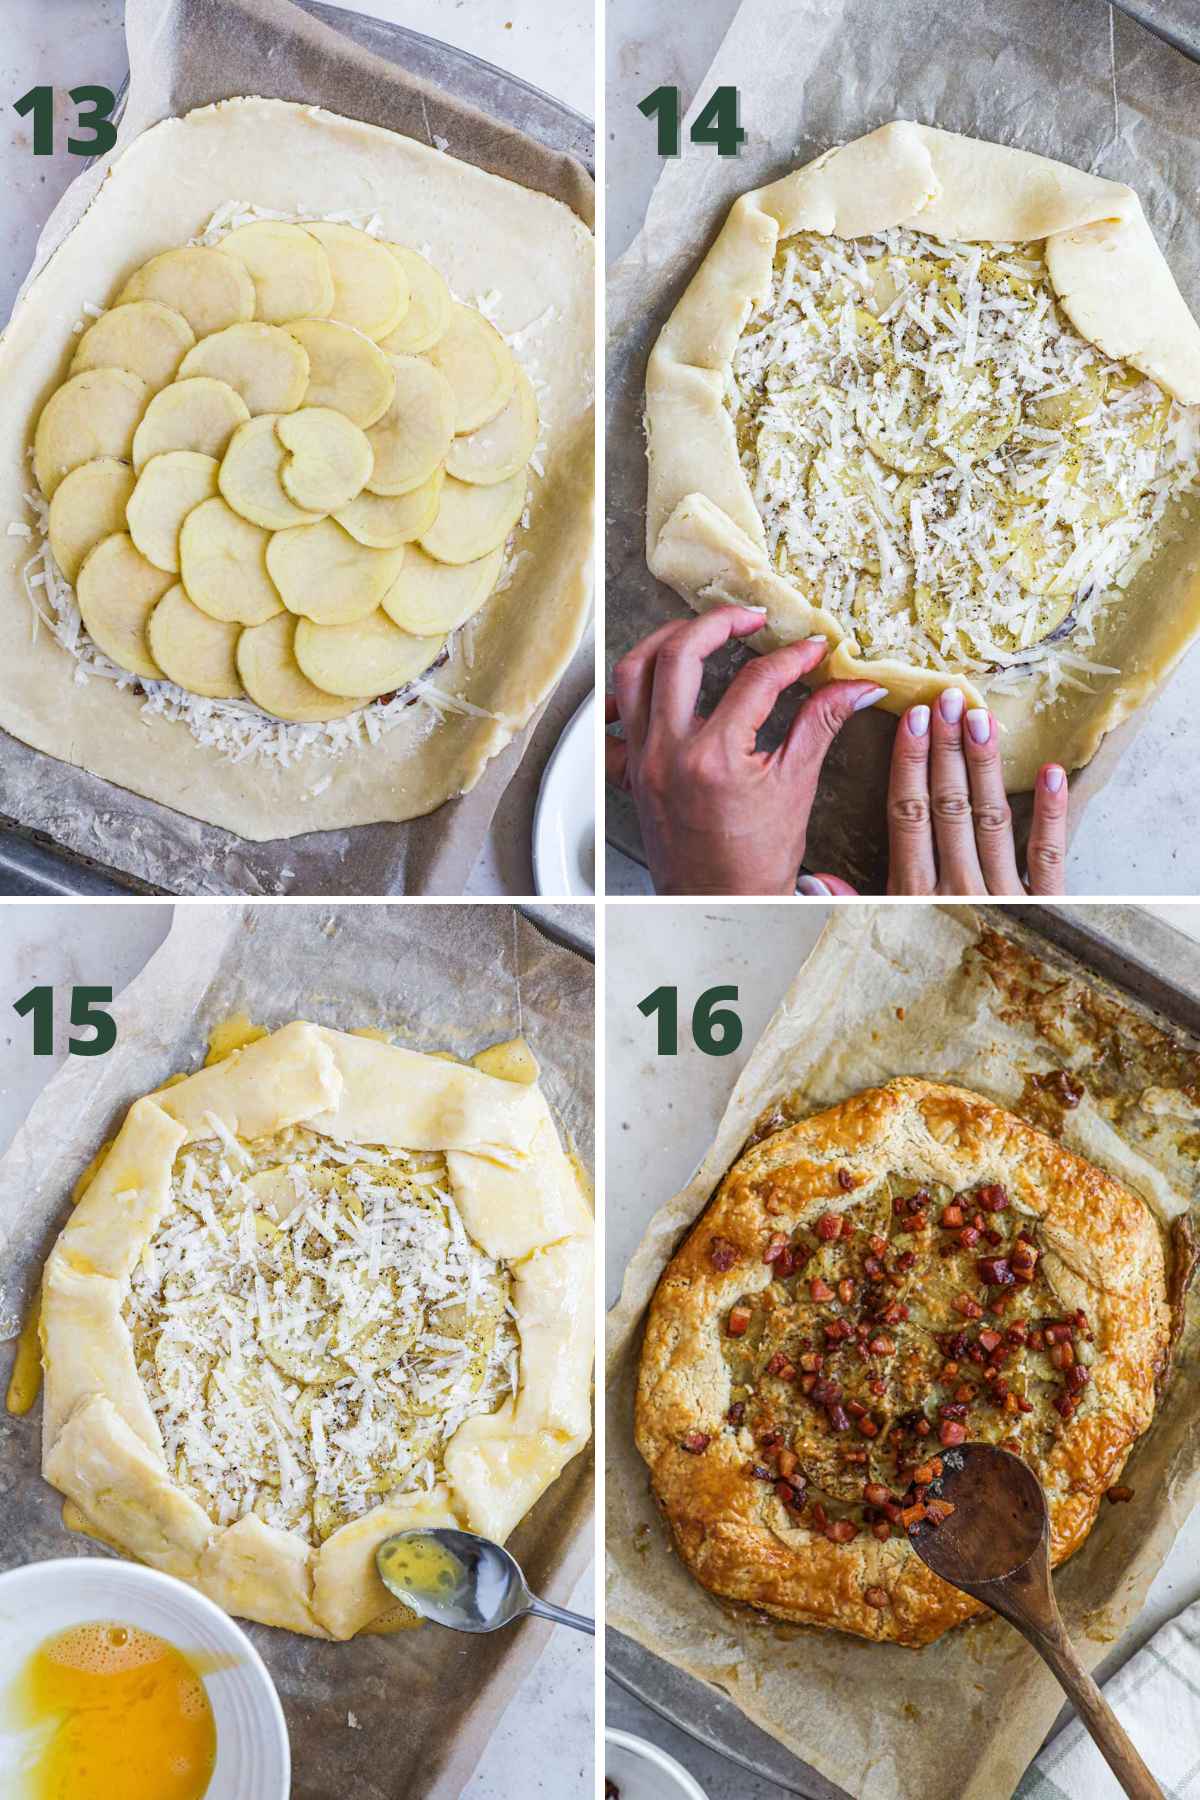 Steps to make crispy pancetta guanciale and potato crostata, including layering the potatoes and cheese, brushing with egg wash, baking, and adding the pancetta and chives.